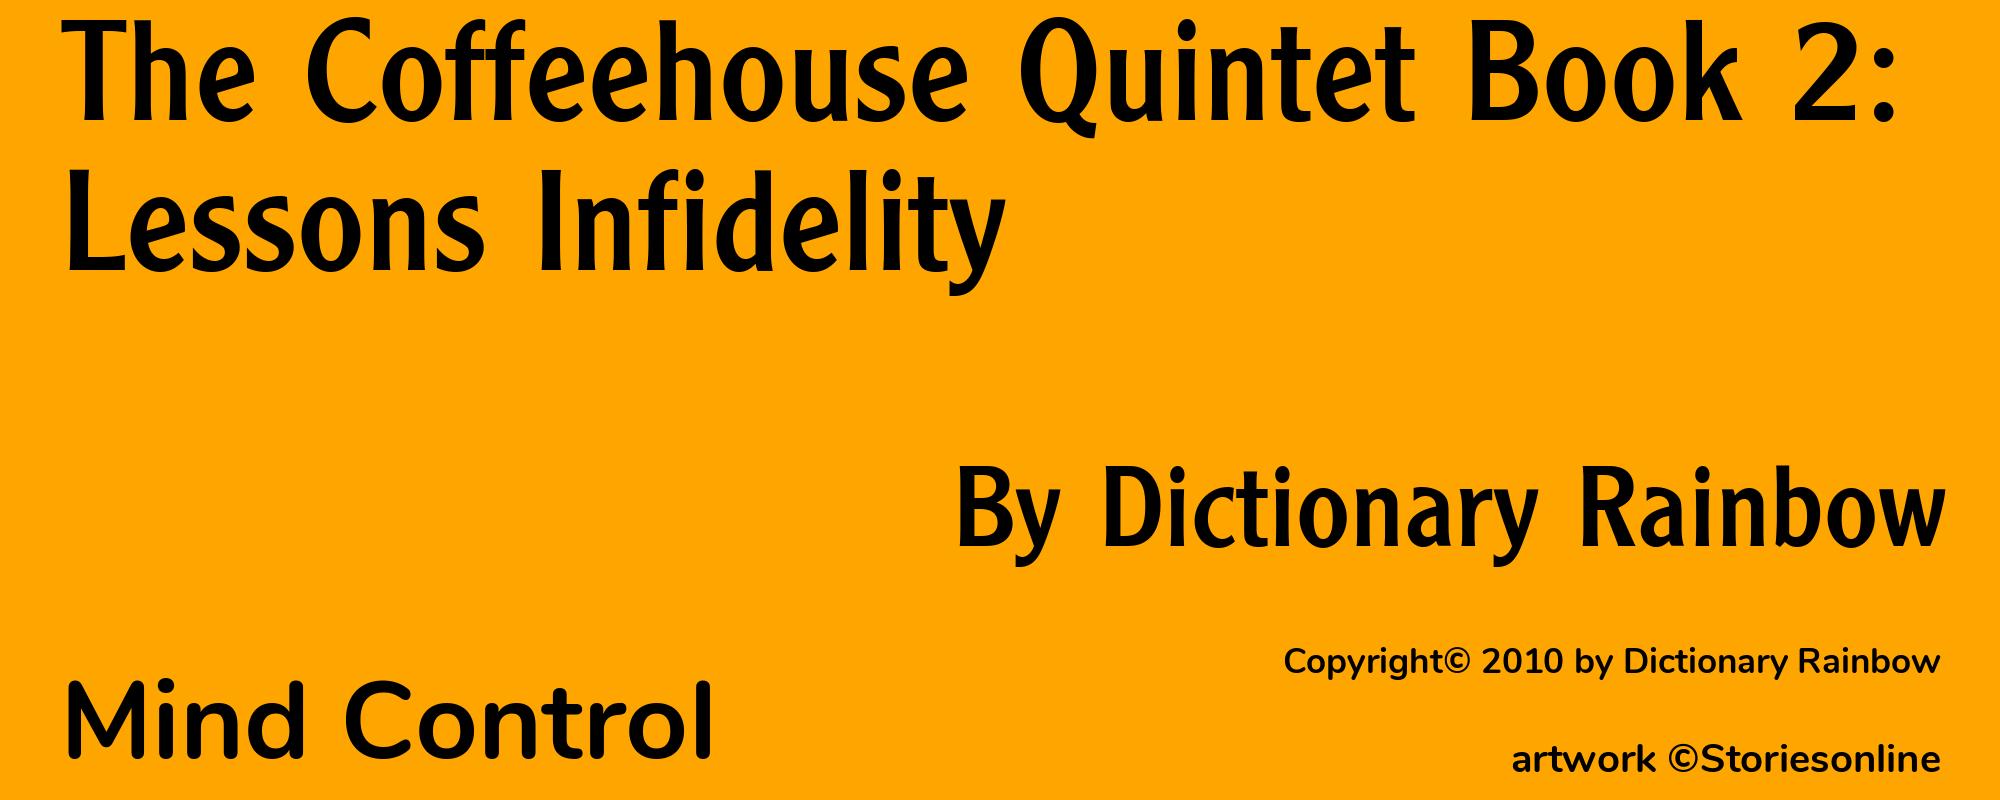 The Coffeehouse Quintet Book 2: Lessons Infidelity - Cover